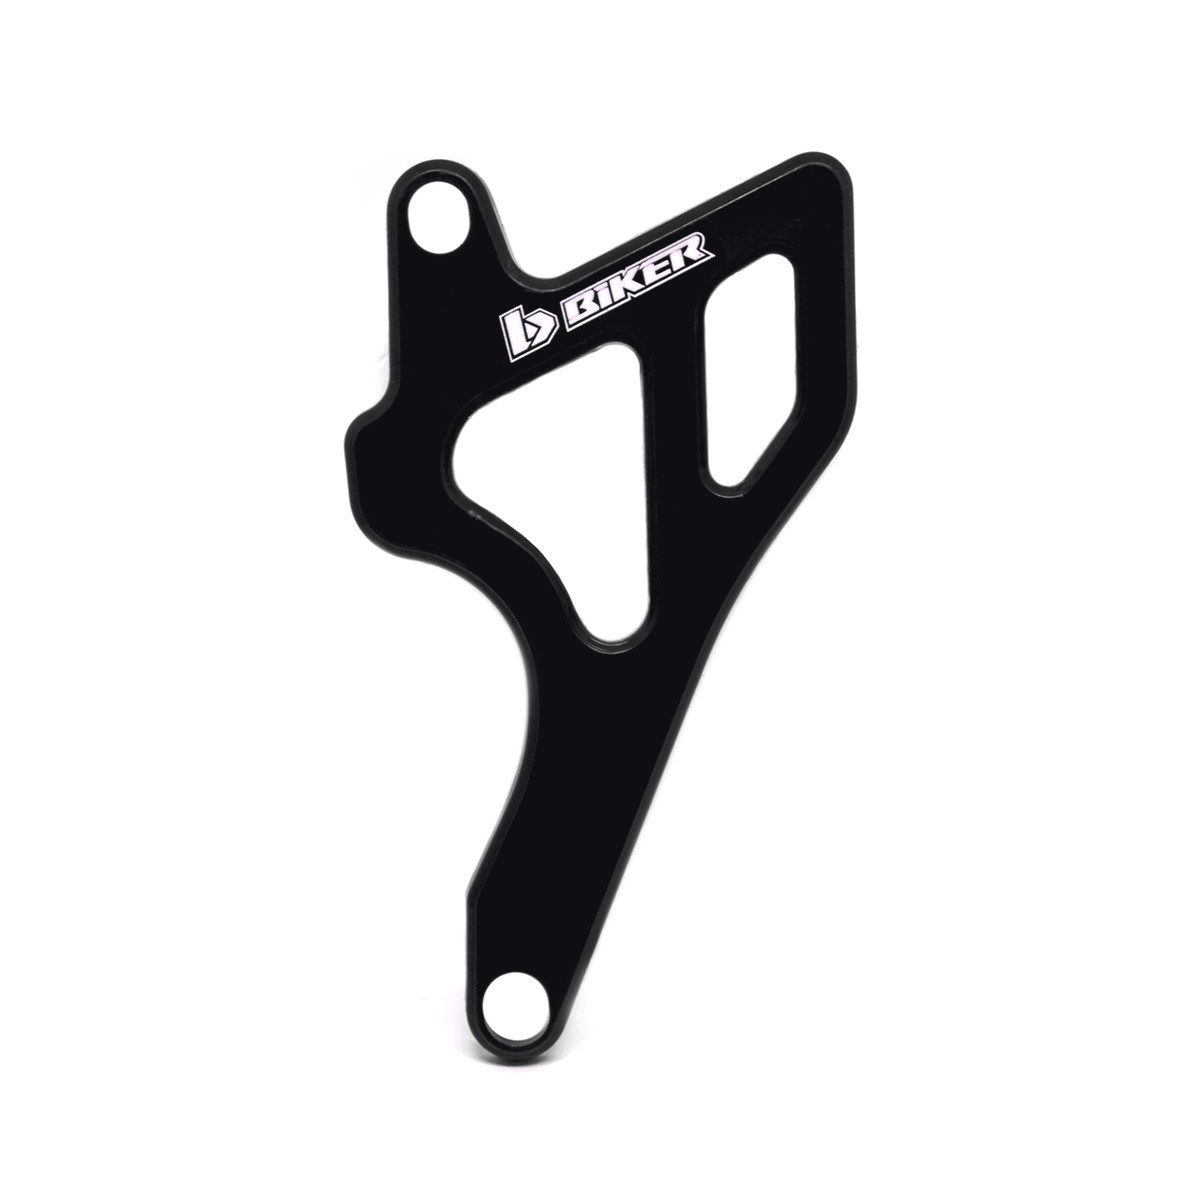 FRONT SPROCKET PROTECTOR